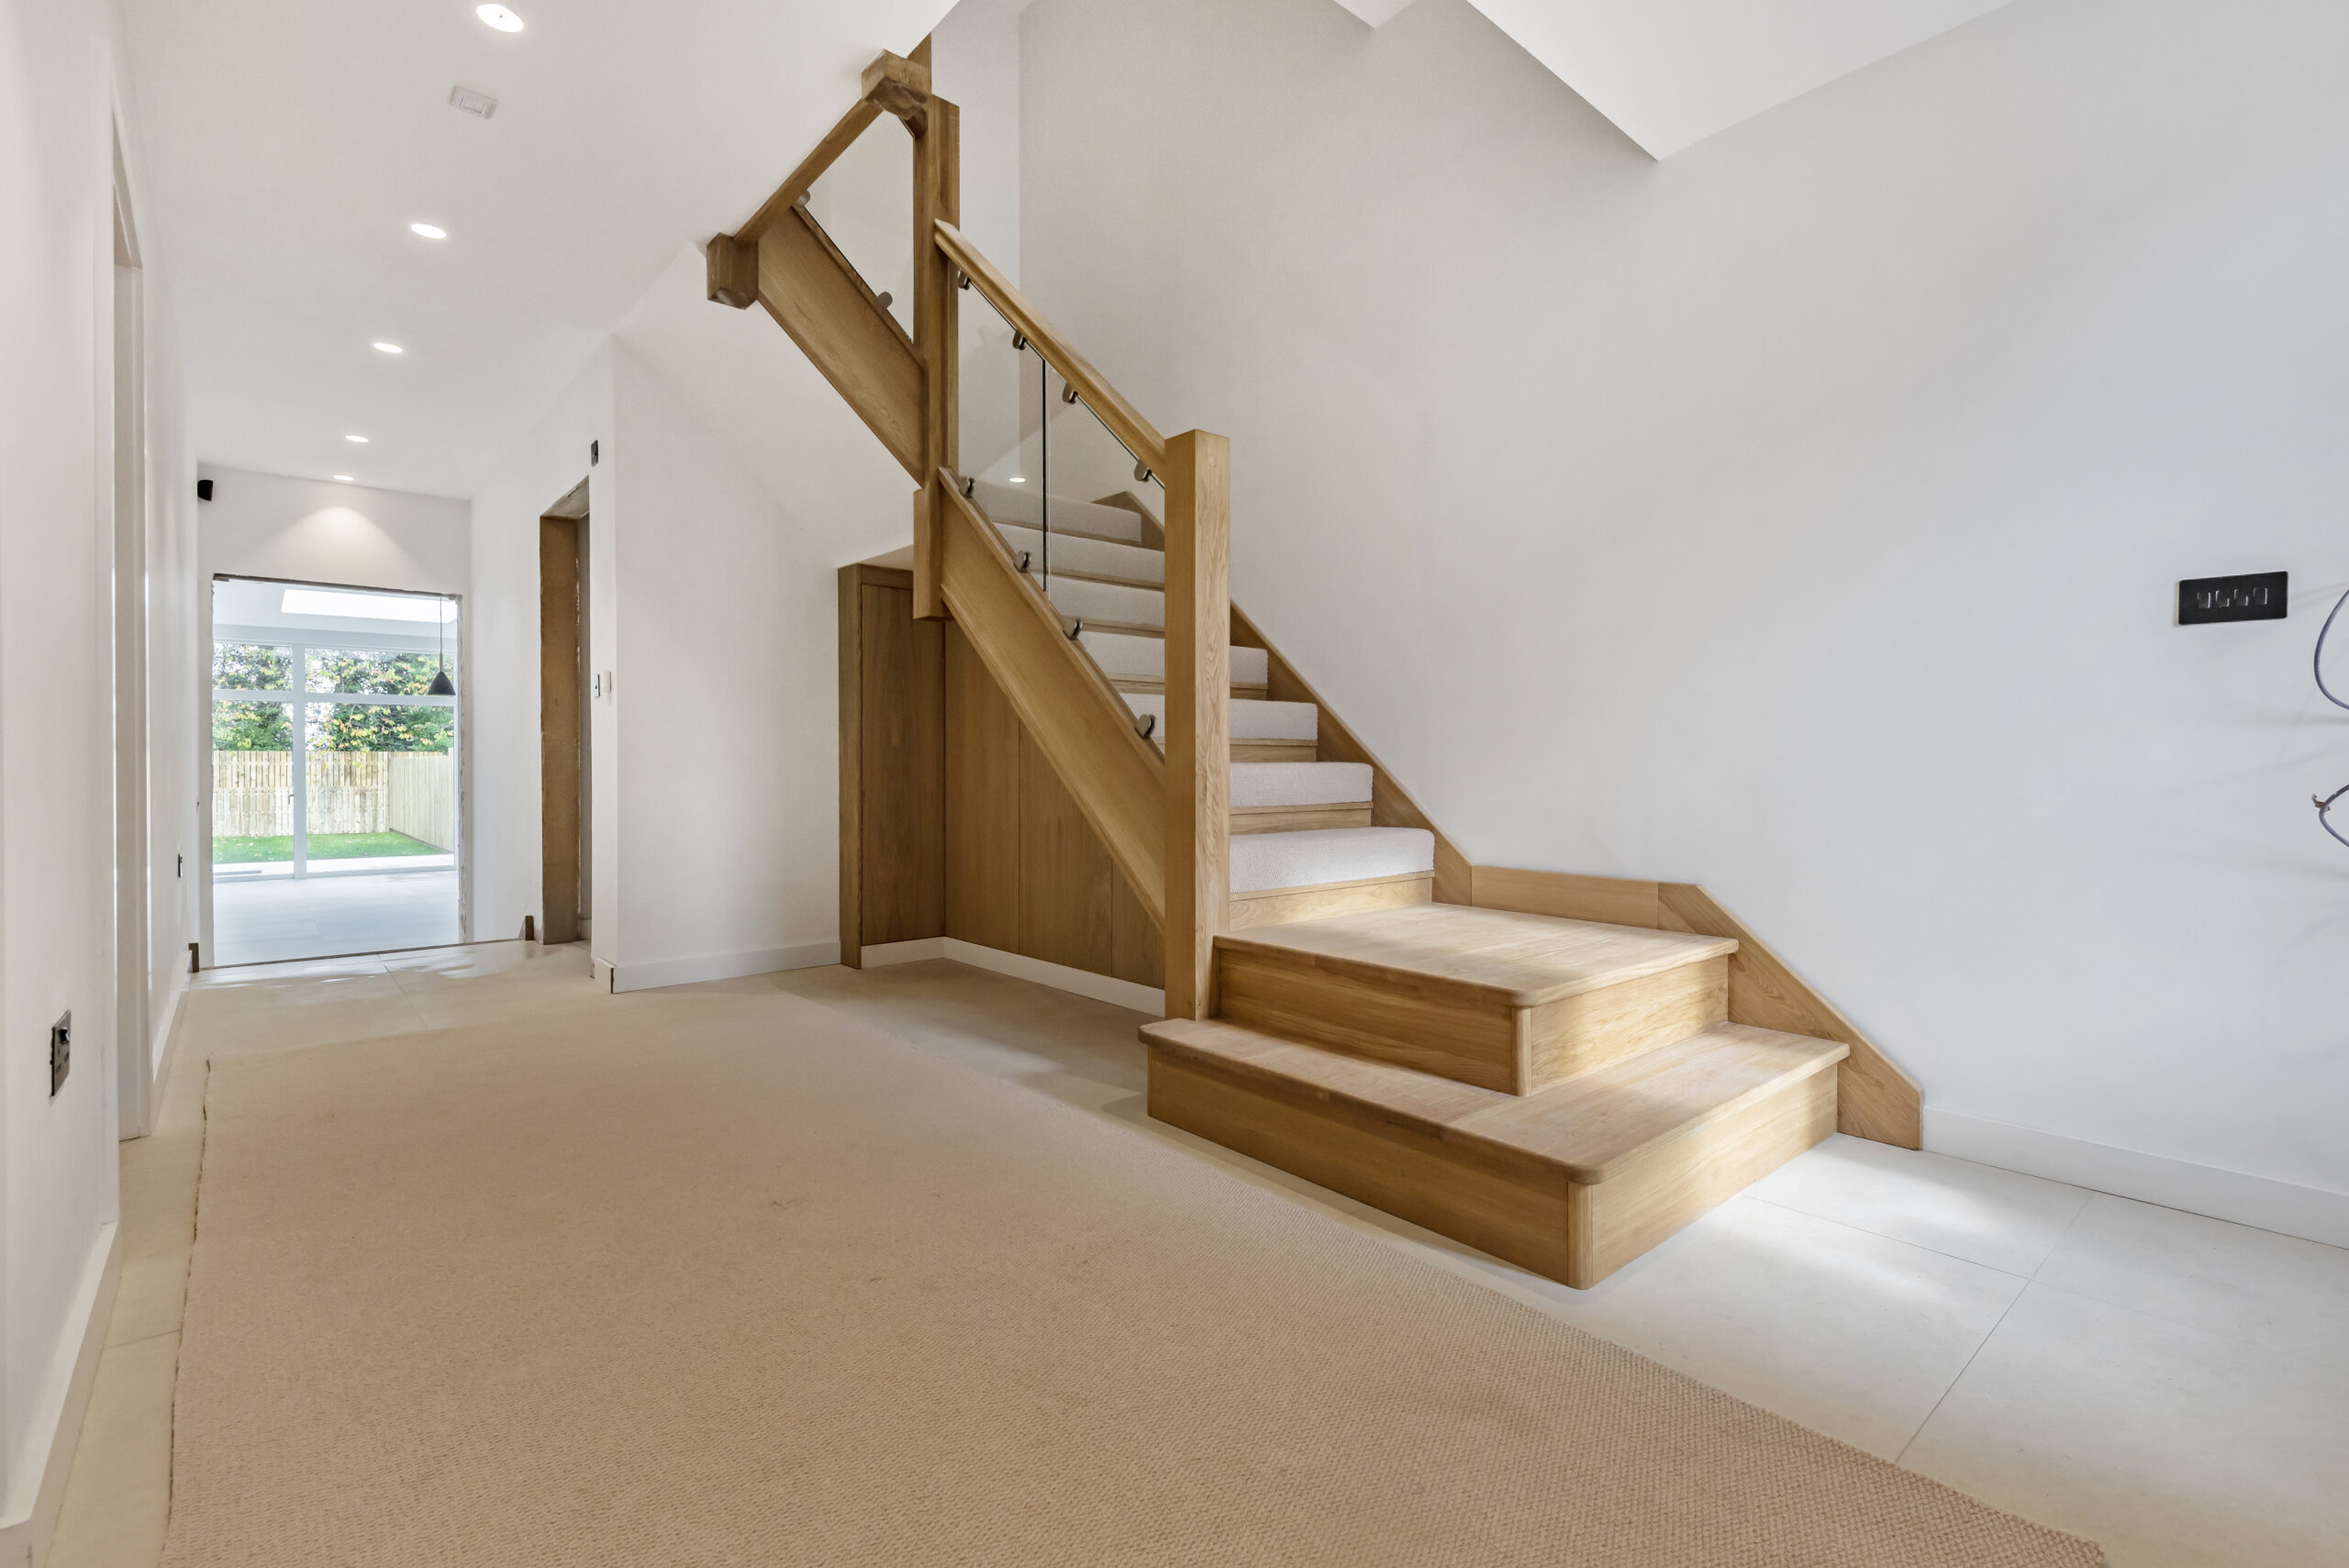 New build Leeds staircase